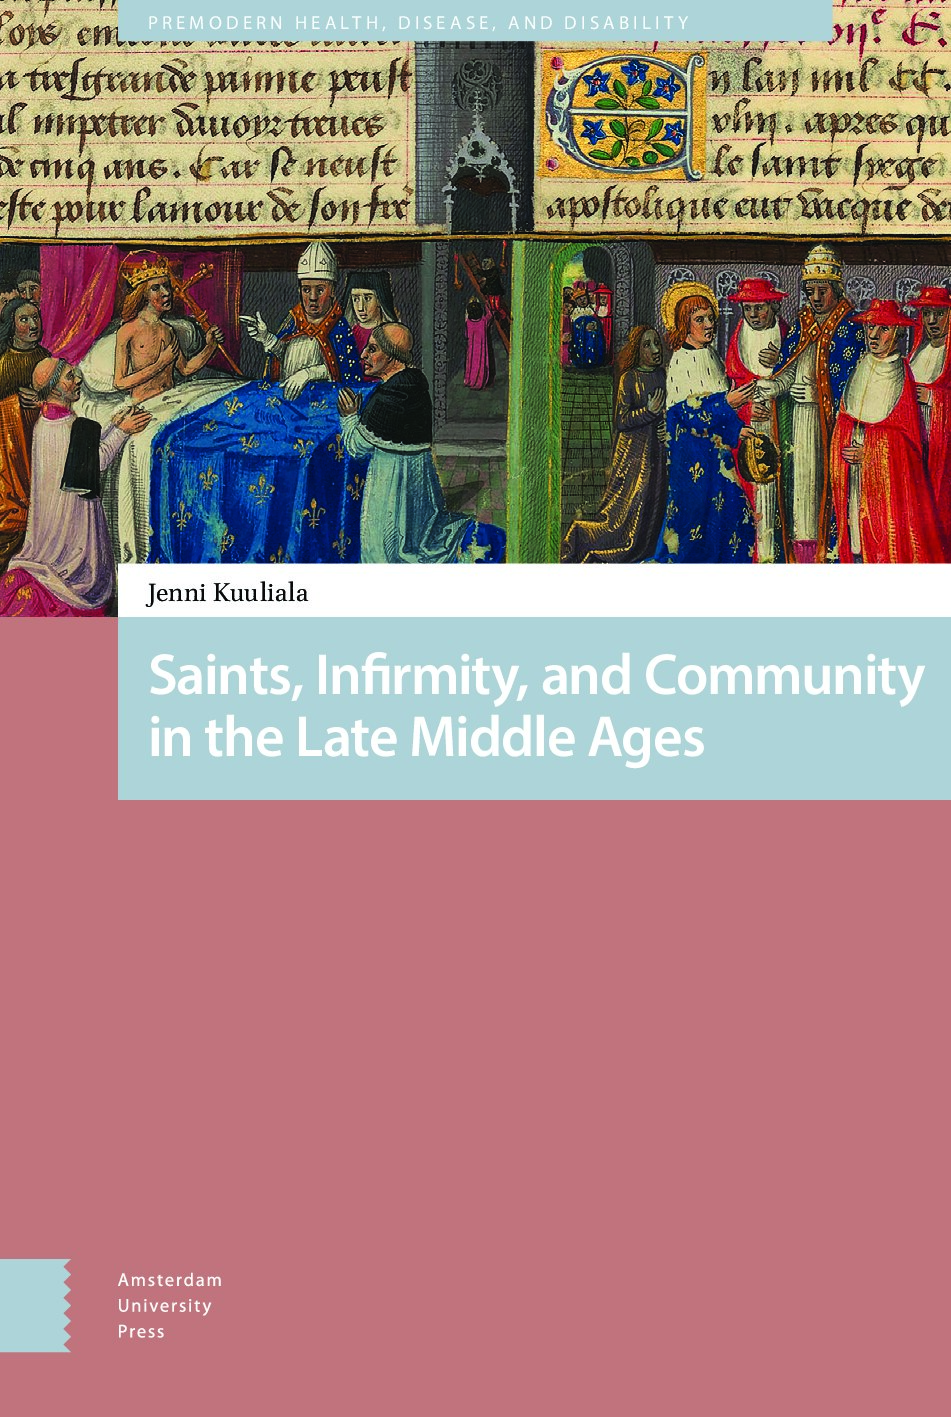 Saints, Infirmity, and Community in the Late Middle Ages